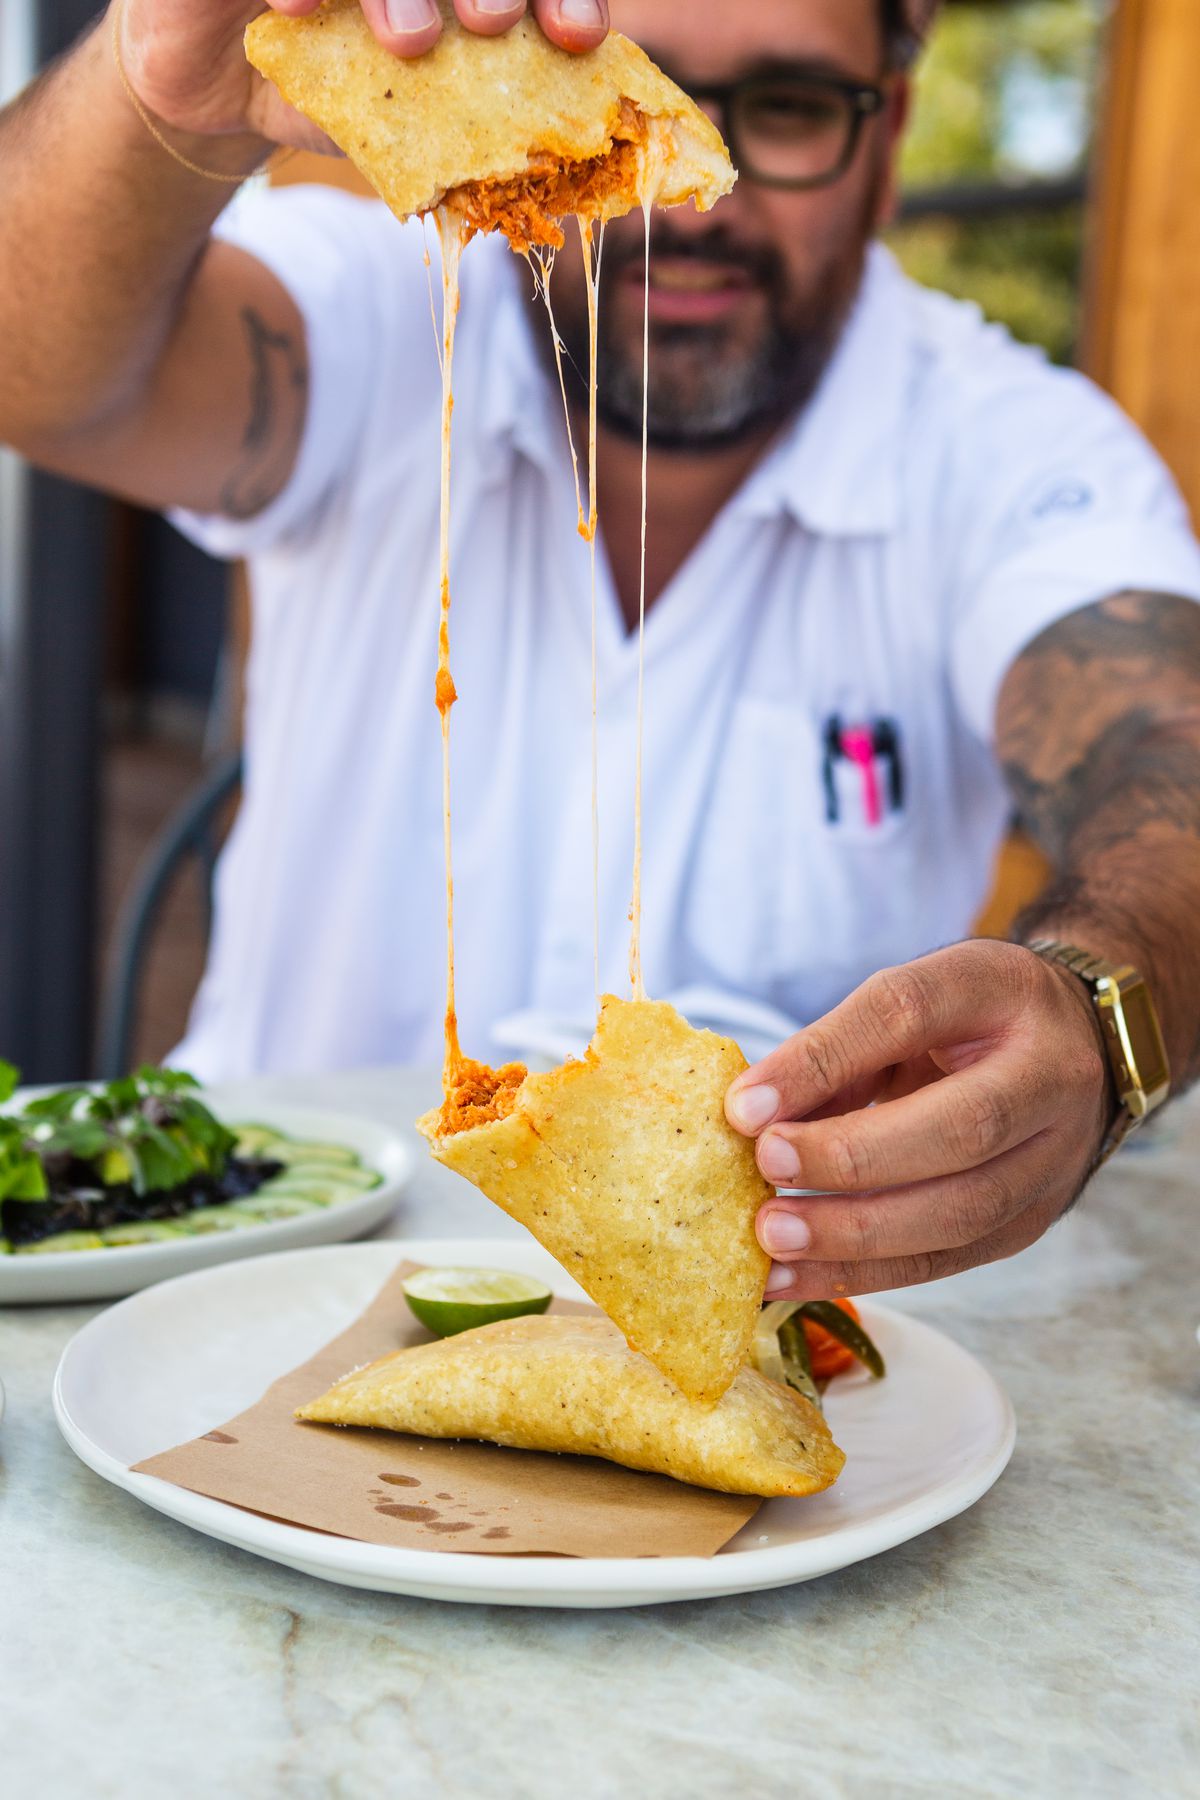 A man with a gold watch pulling an empanada apart with cheese between the two halves.